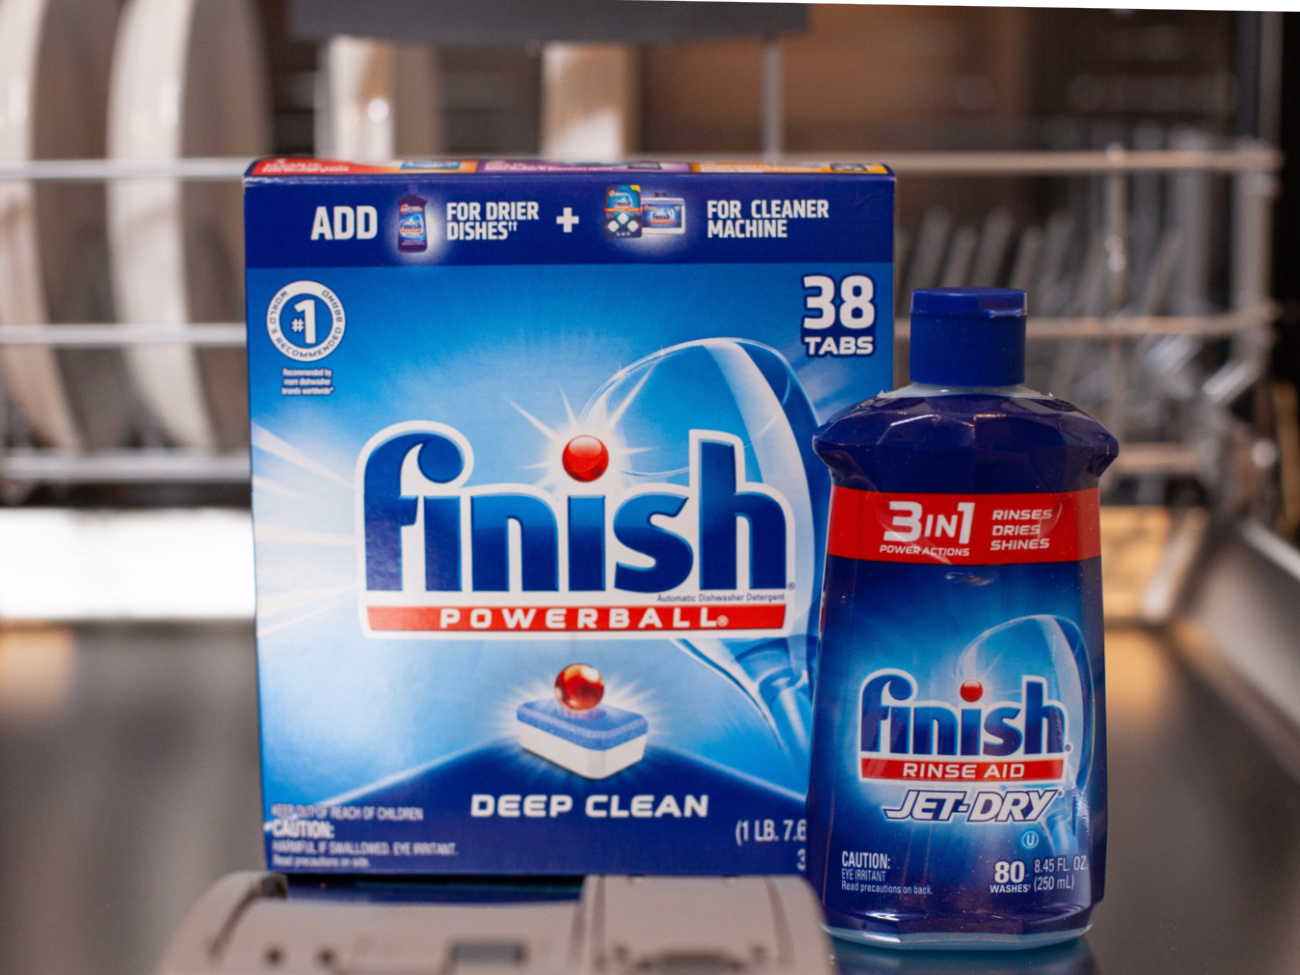 Finish Dishwasher Detergent & Jet-Dry Rinse Aid As Low As $4.99 Each At Publix